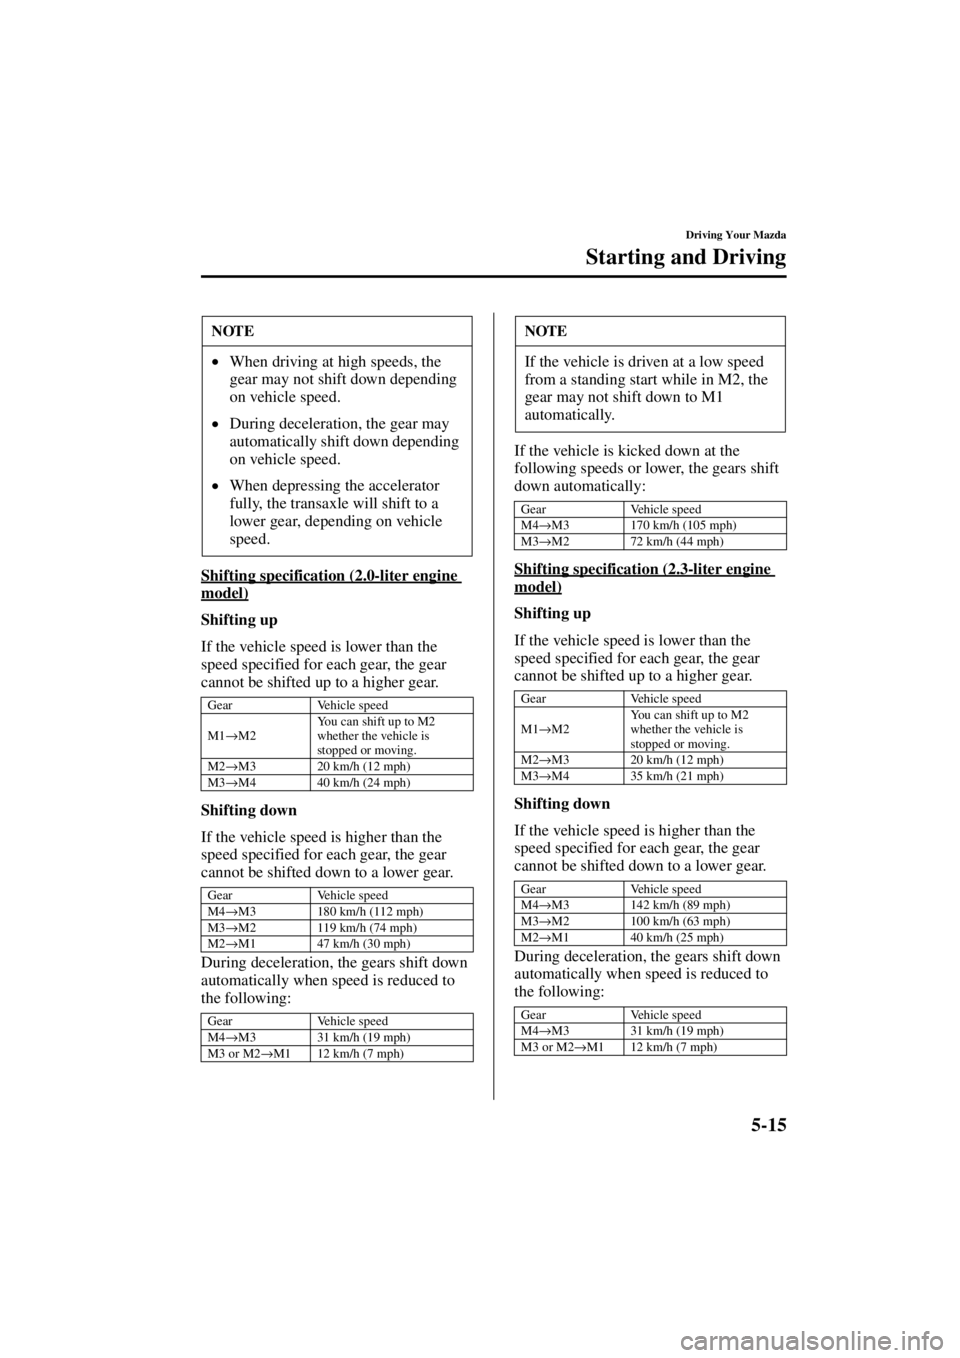 MAZDA MODEL 3 5-DOOR 2004 User Guide 5-15
Driving Your Mazda
Starting and Driving
Form No. 8S18-EA-03I
Shifting specification (2.0-liter engine 
model)
Shifting up
If the vehicle speed is lower than the 
speed specified for each gear, th